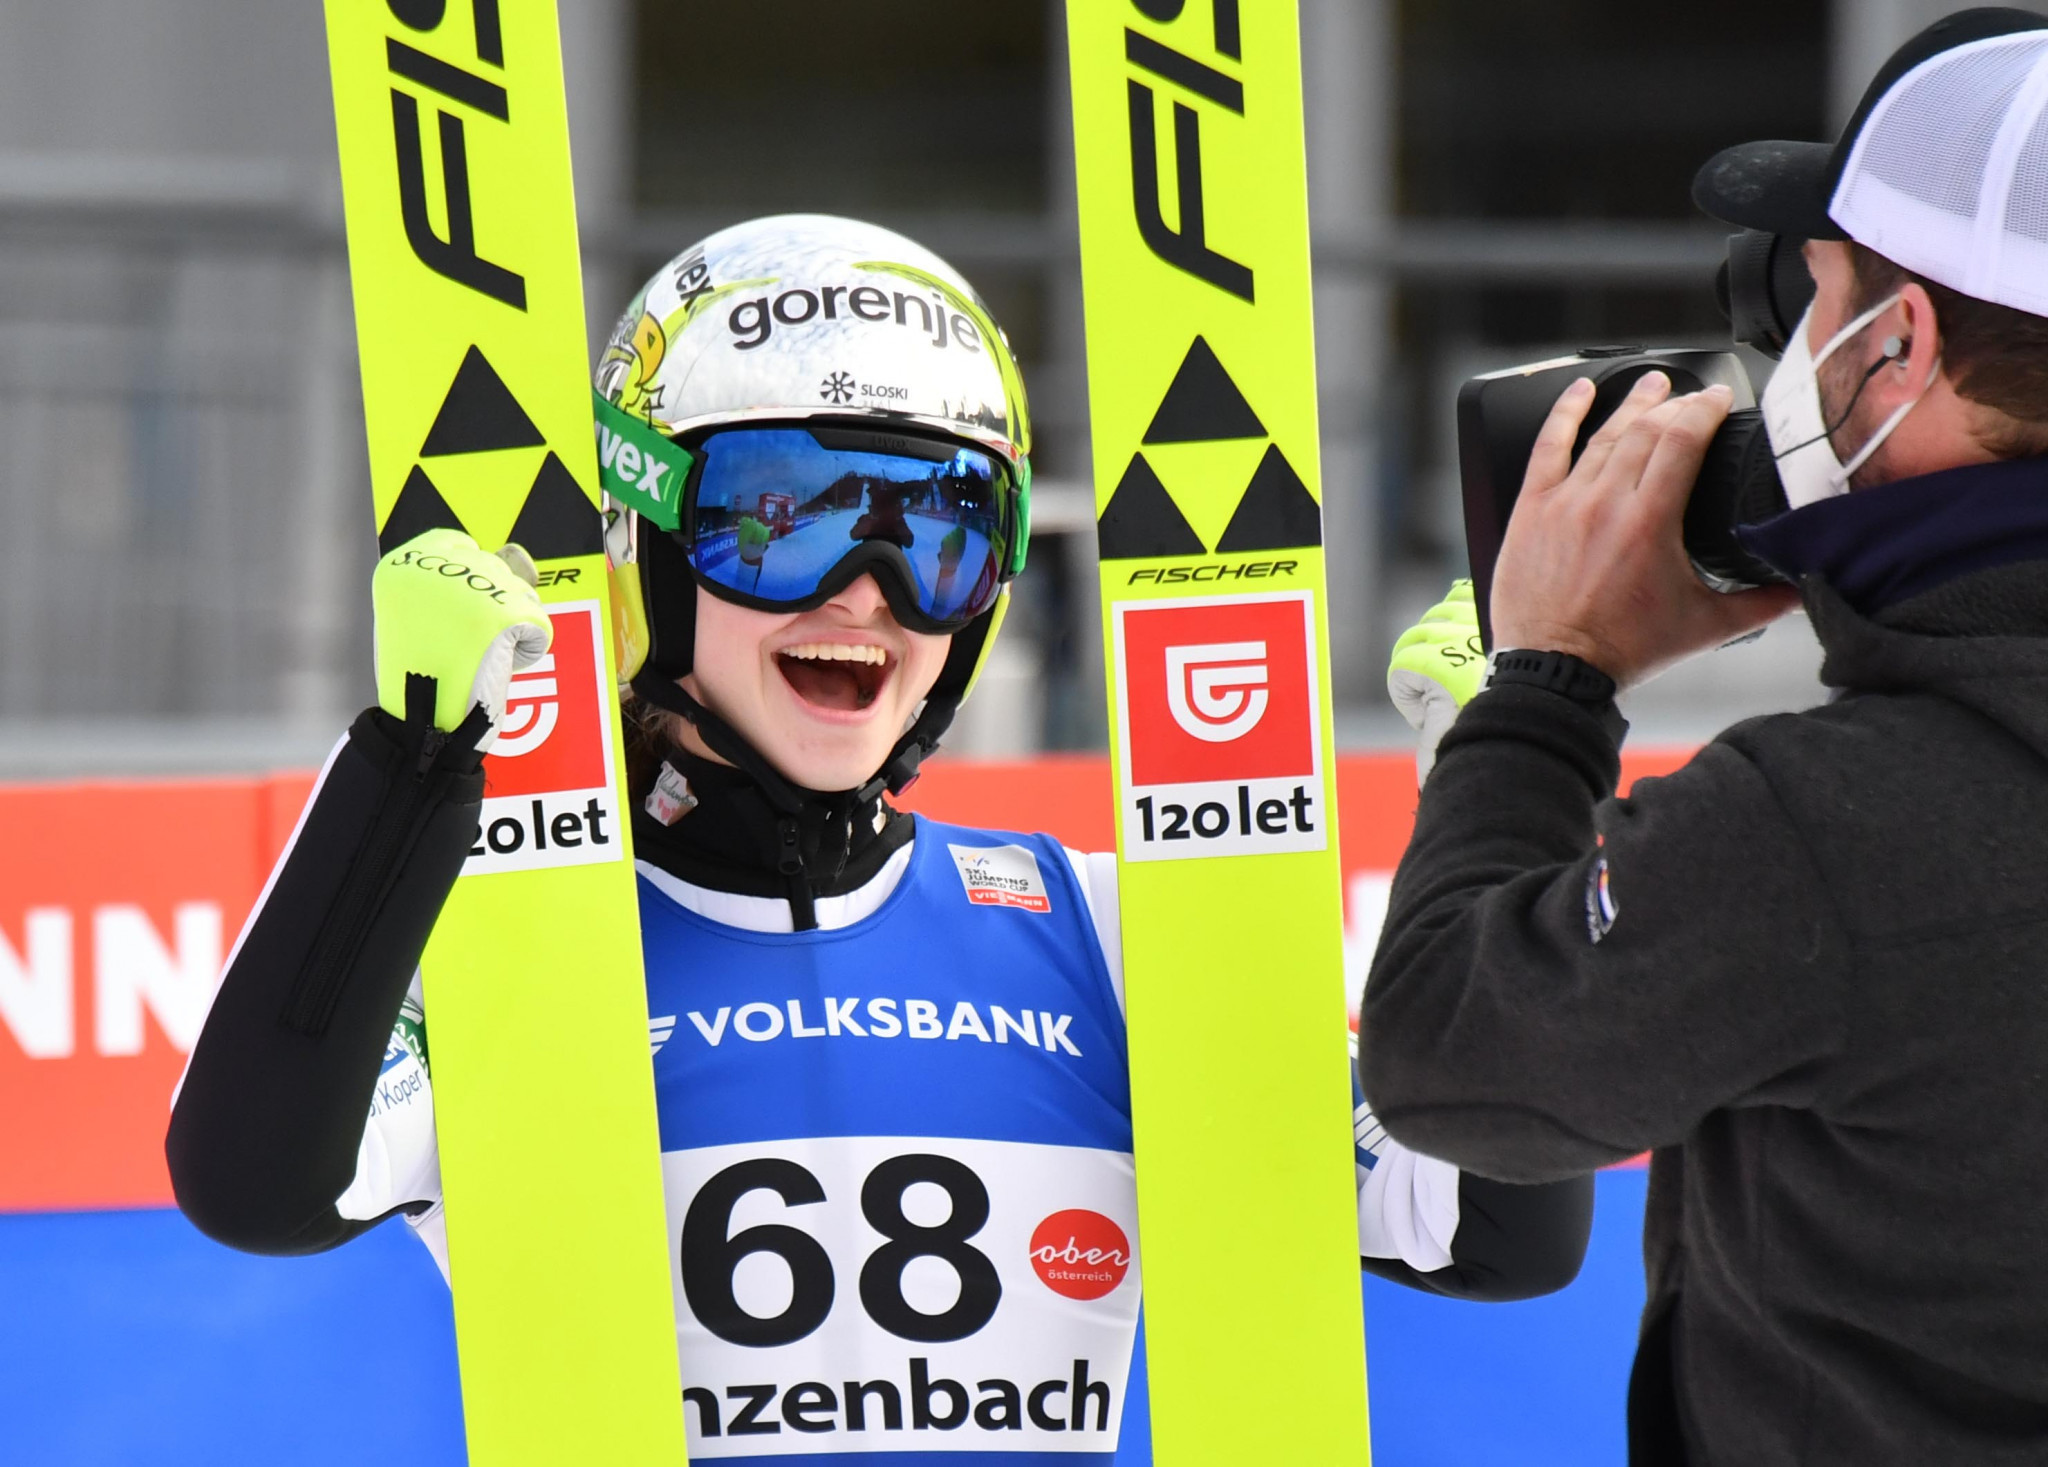 Nika Križnar claimed her first win in the FIS Ski Jumping World Cup ©Getty Images